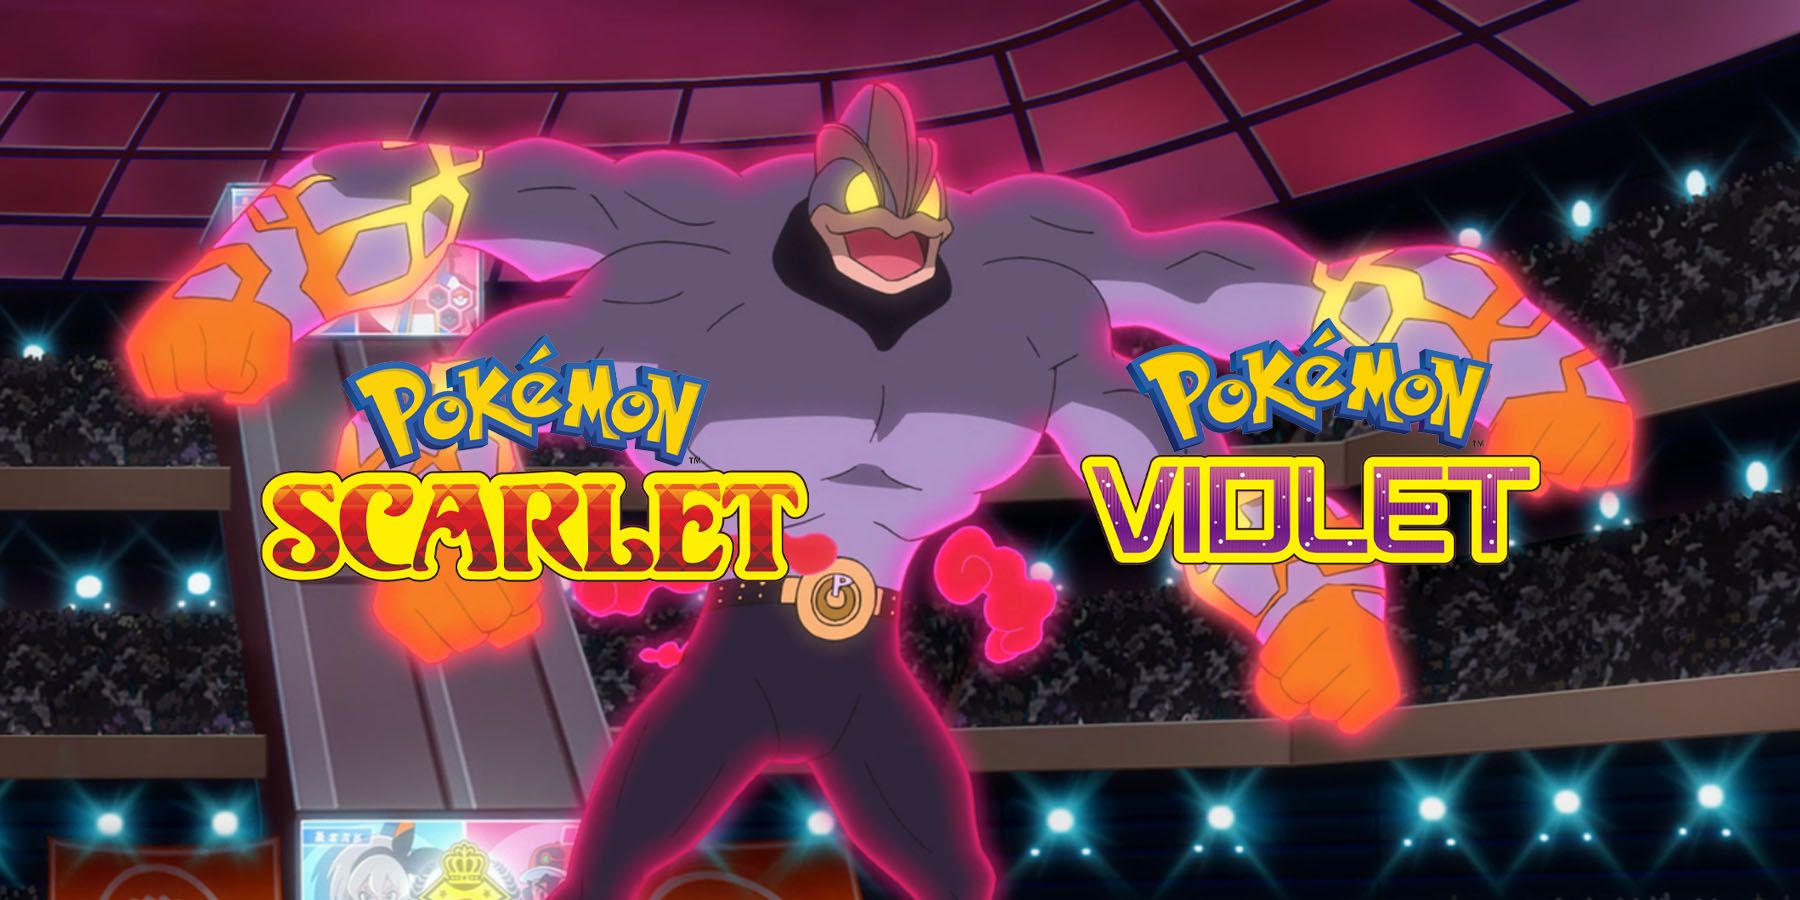 The text logos for Pokemon Scarlet and Violet with Gigantamax Machamp in the background.